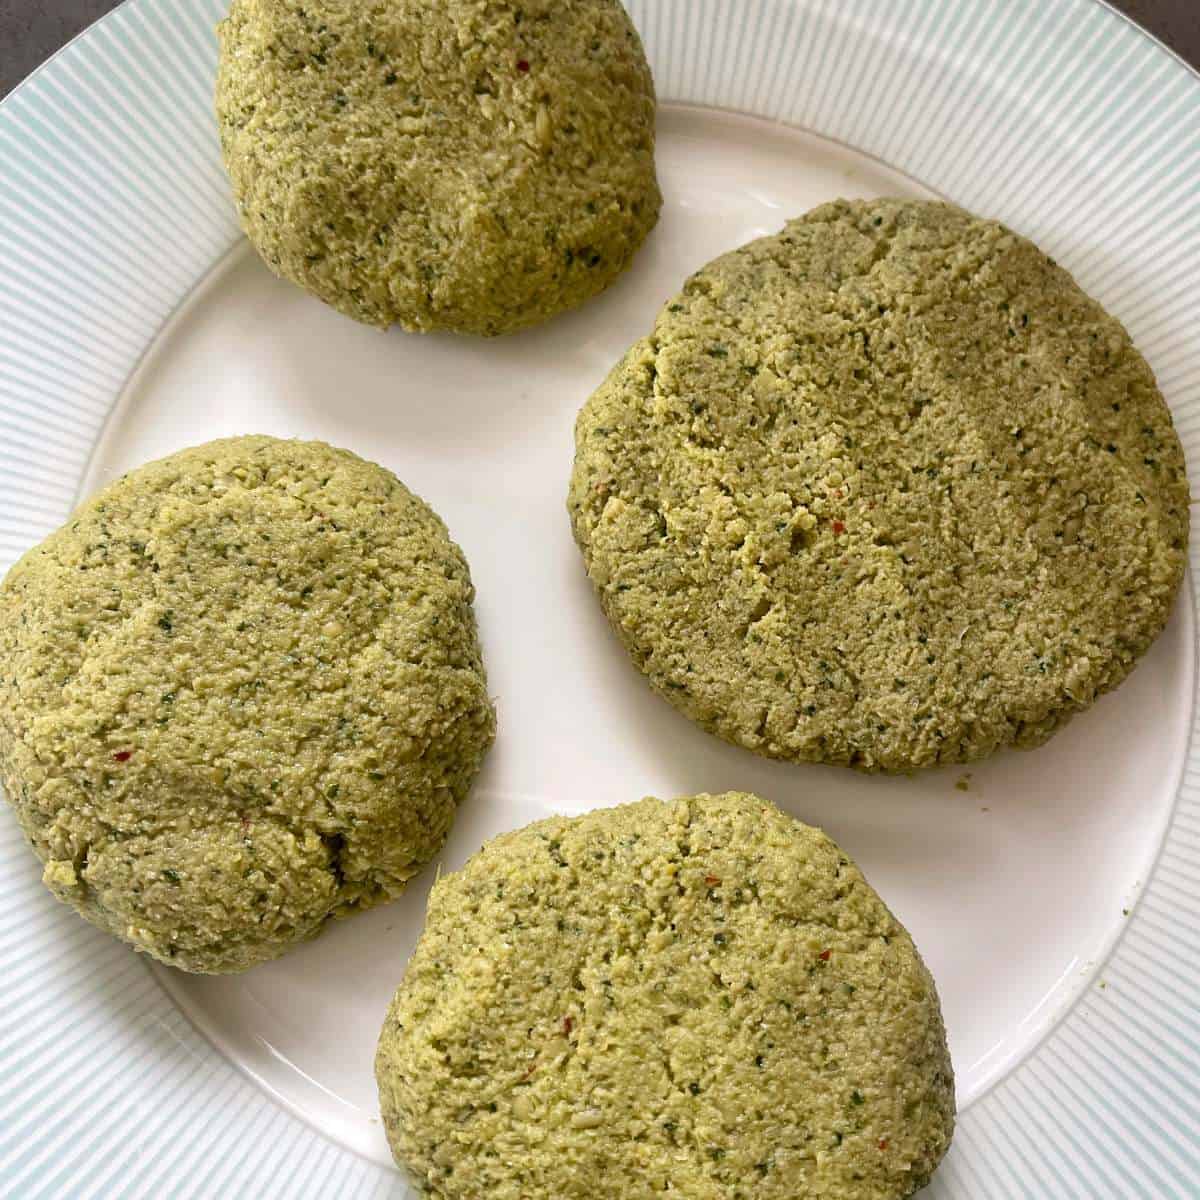 Four falafel burger patties uncooked on a white plate.